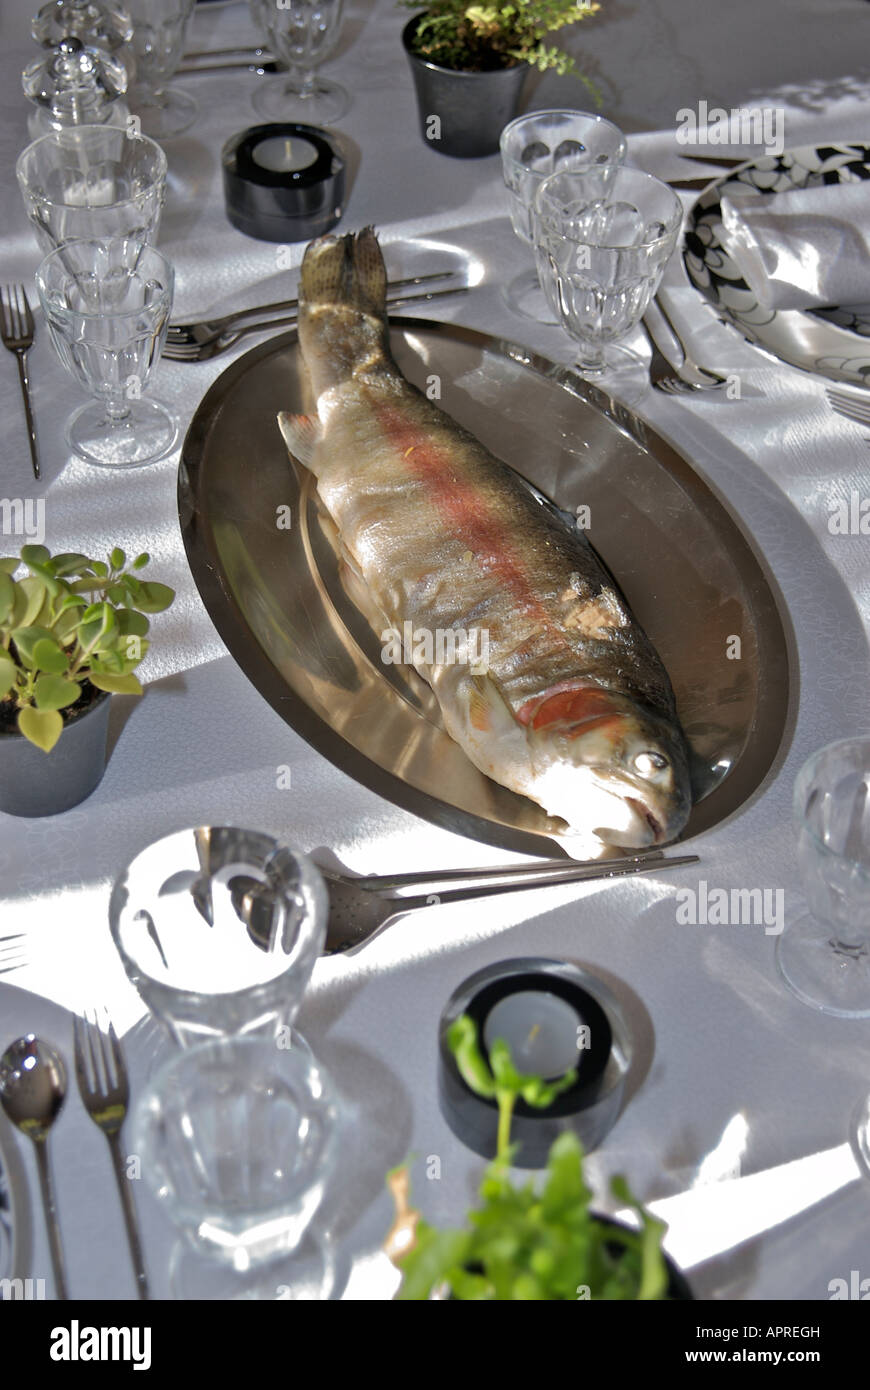 Whole cooked trout fish on a dining table with place settings Stock Photo